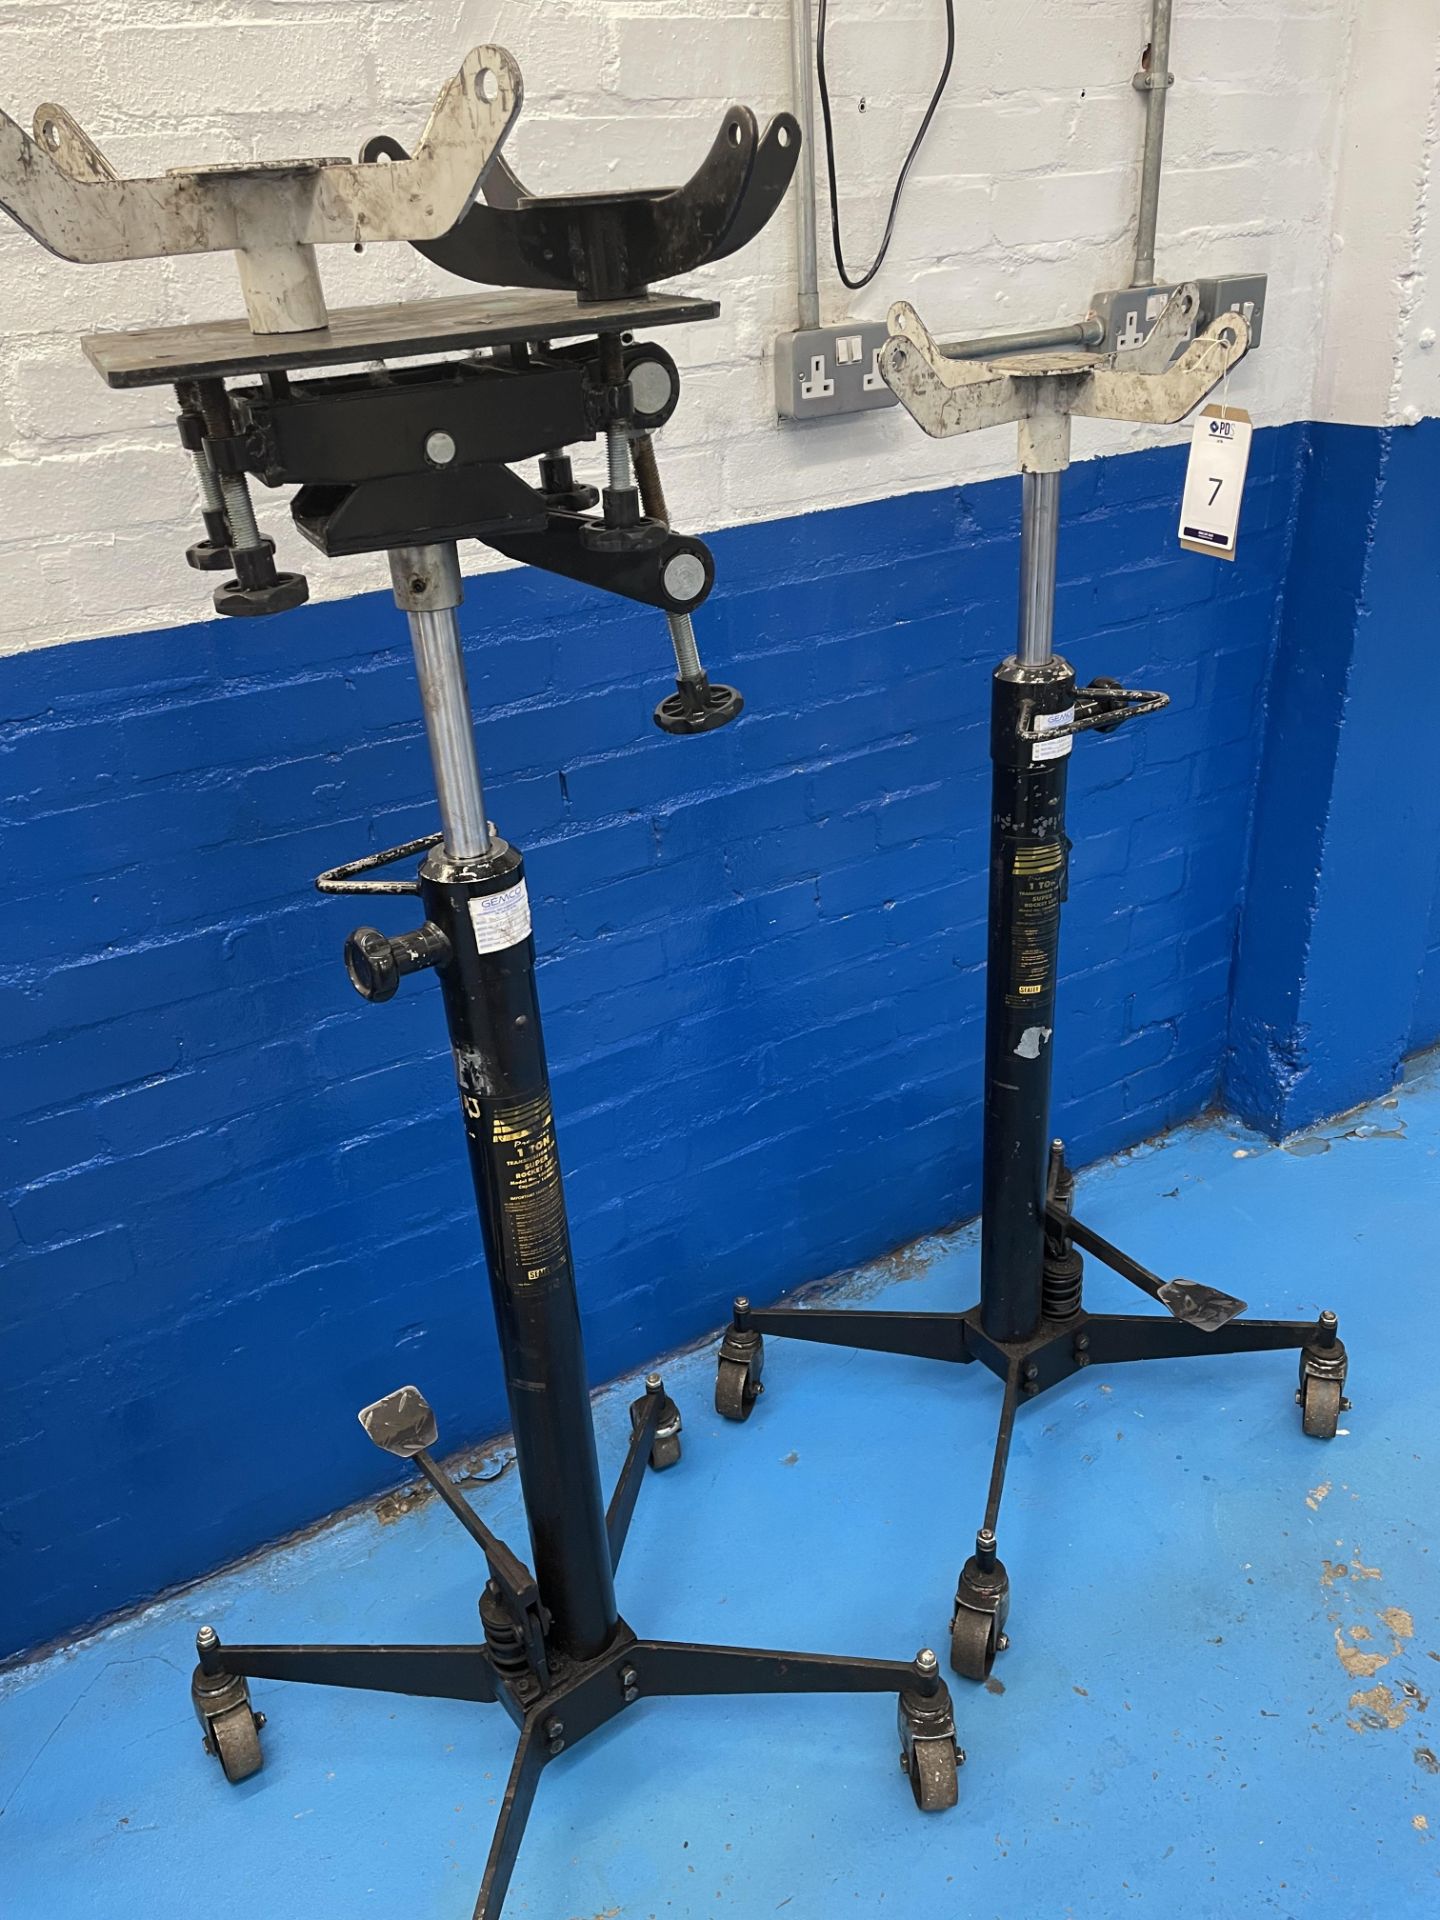 Pair of Sealey Super Rocket transmission jacks, one-tonne capacity with attachments (Location